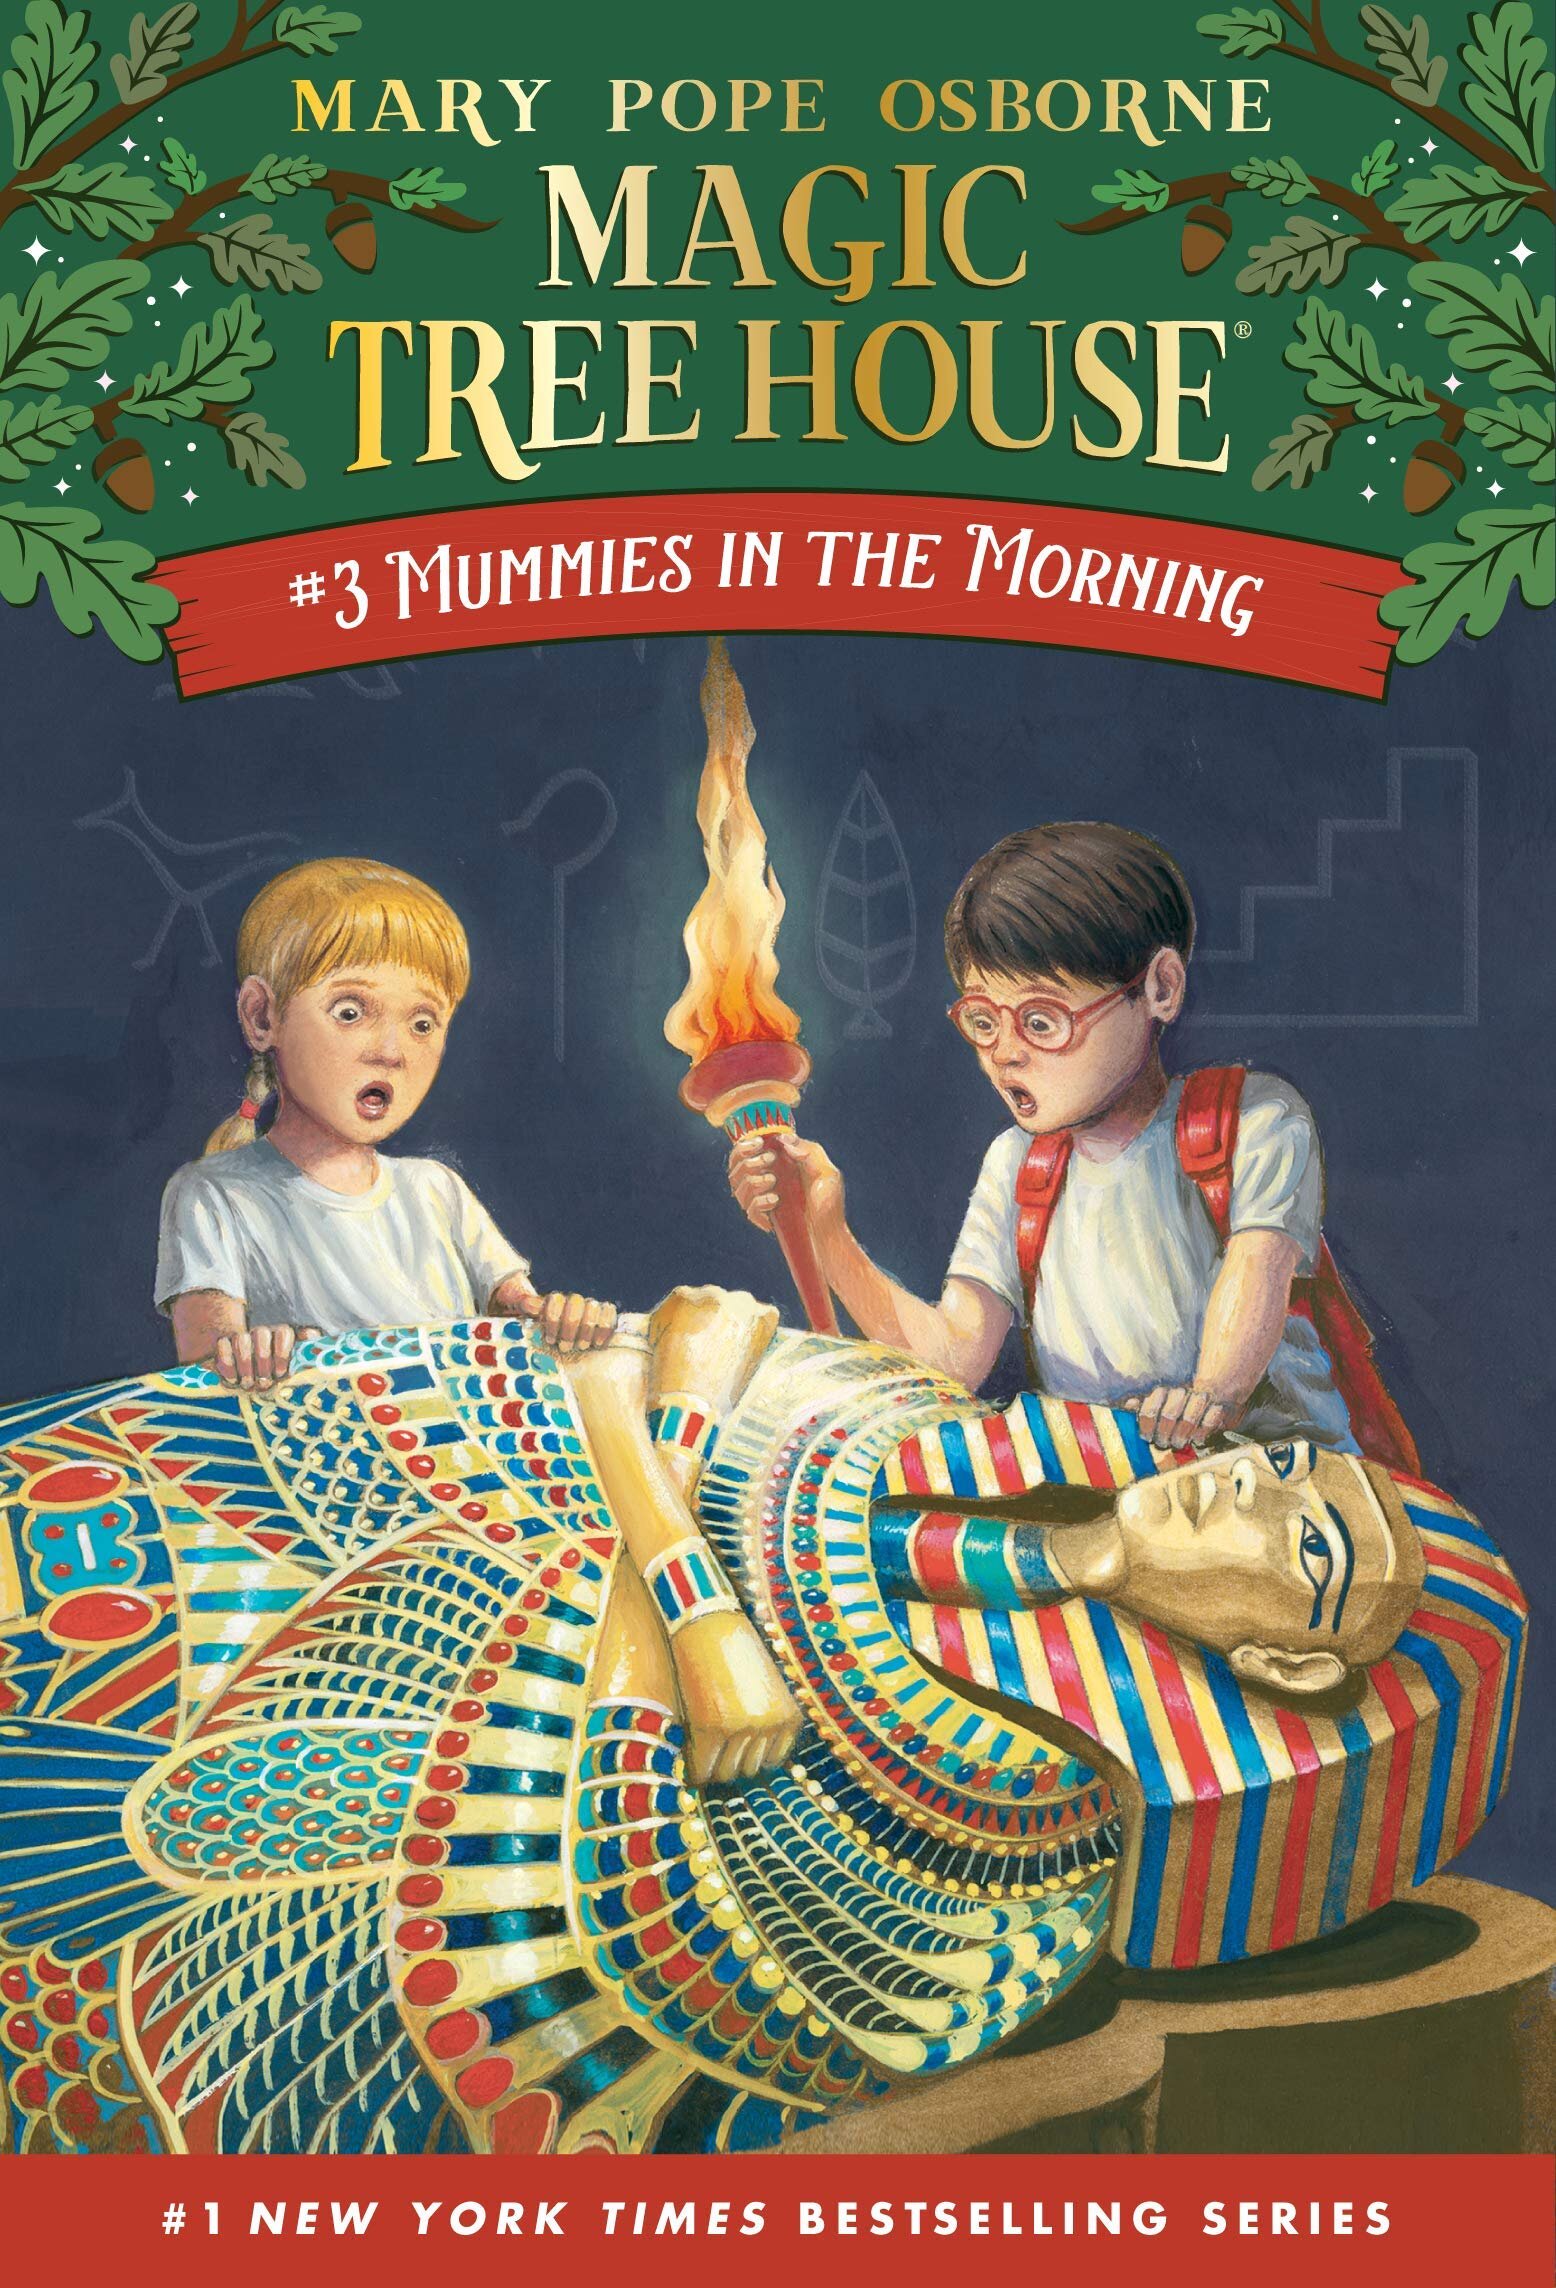  The Magic Tree House Book Review on Hello Rascal Kids. Family lifestyle blog for parents and kids. 